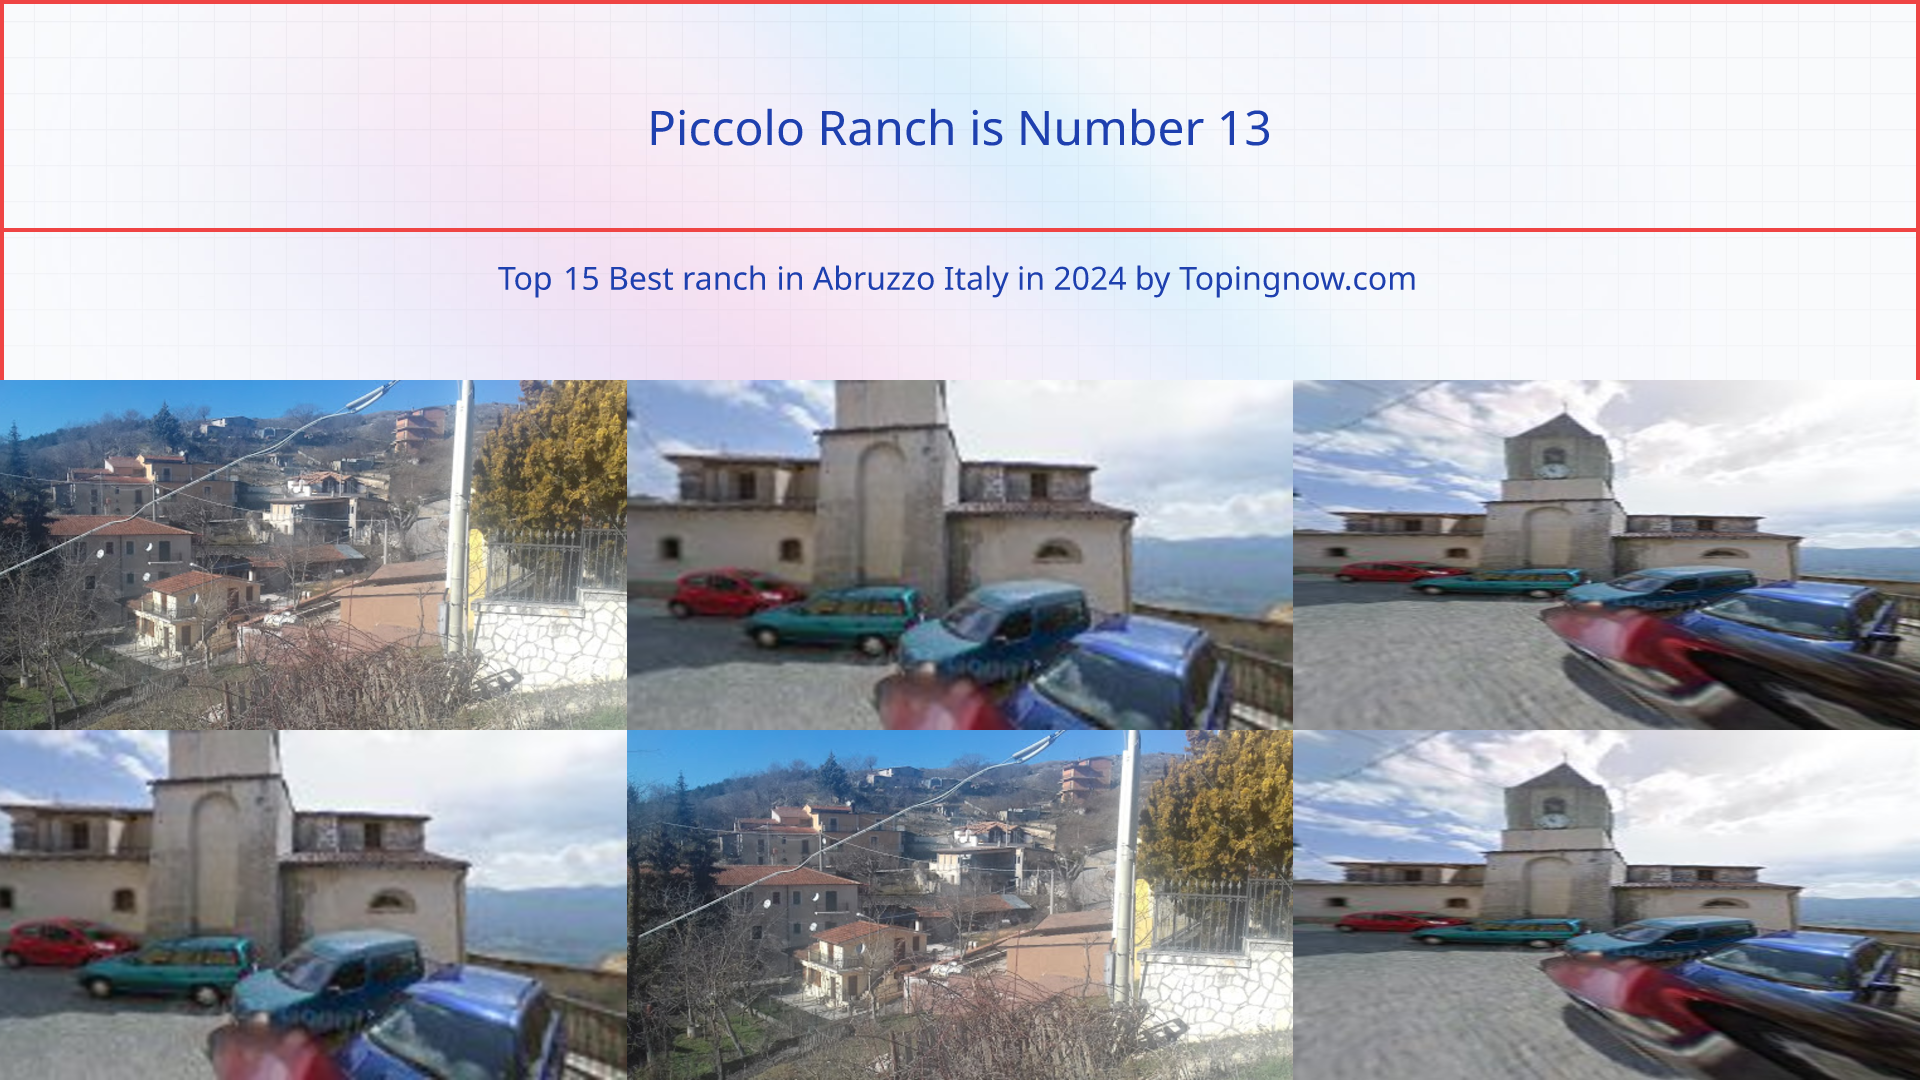 Piccolo Ranch: Top 15 Best ranch in Abruzzo Italy in 2024